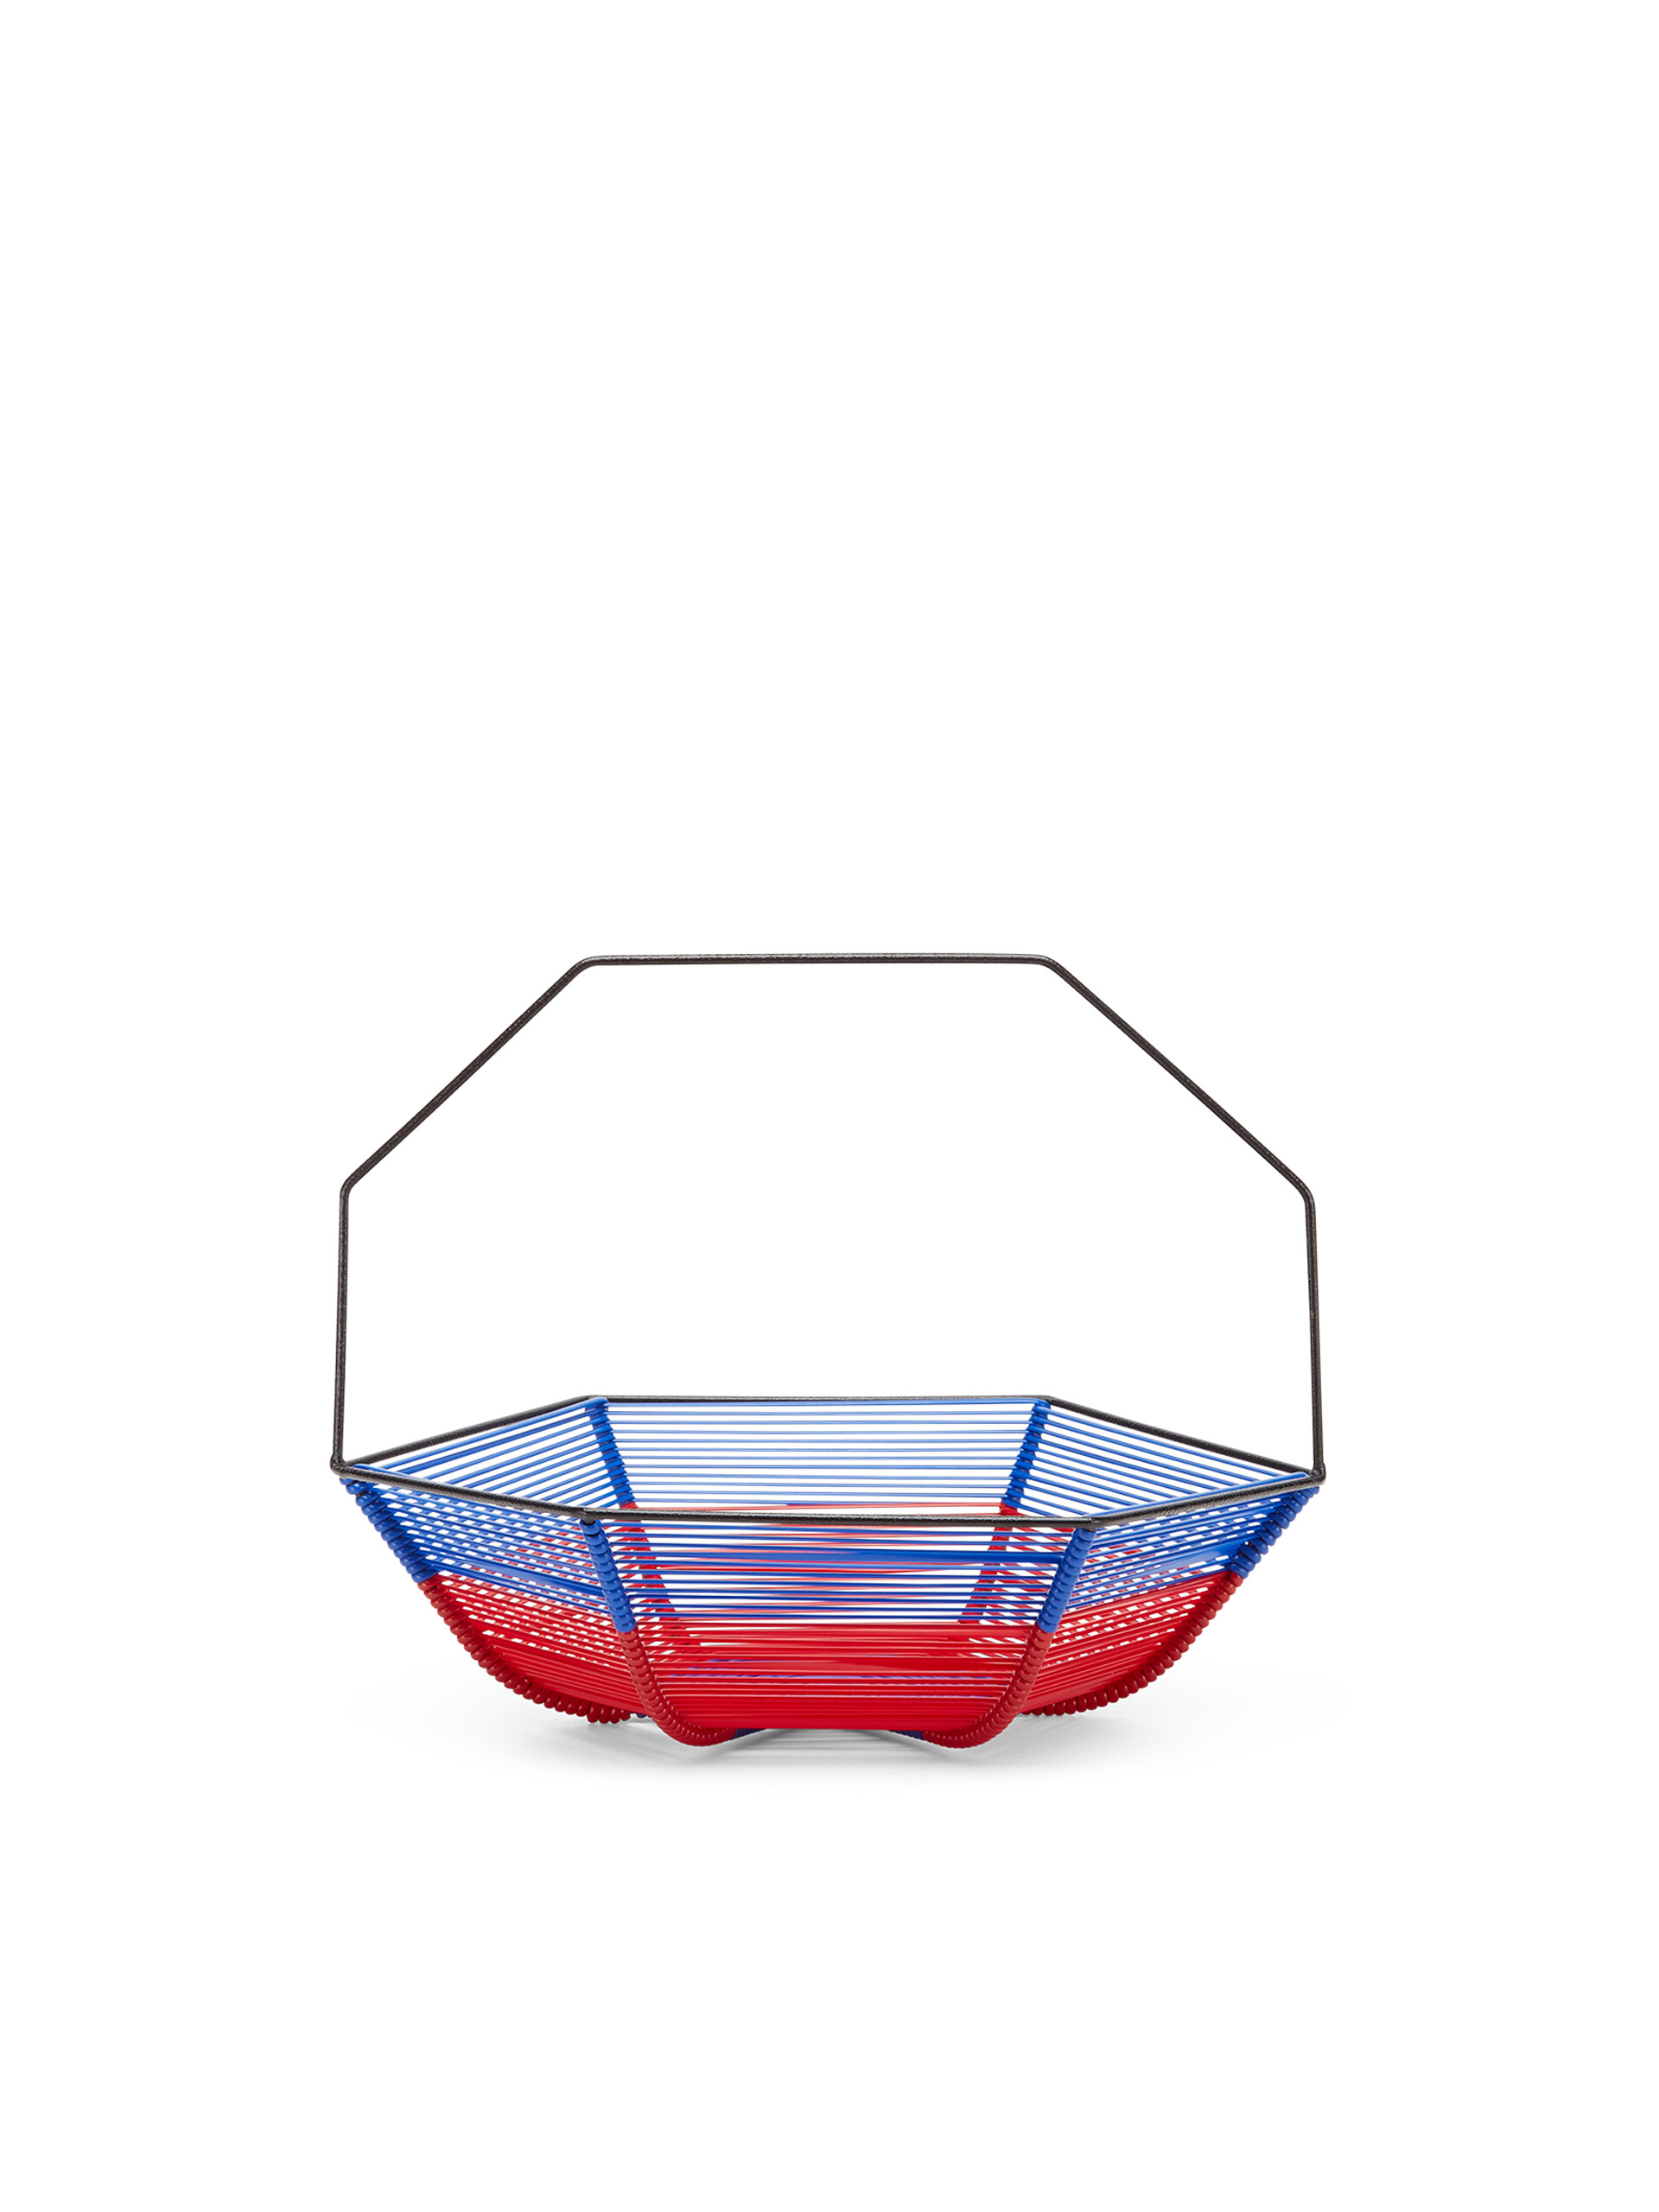 MARNI MARKET iron hexagonal fruit holder with blue and red PVC - Home Accessories - Image 3